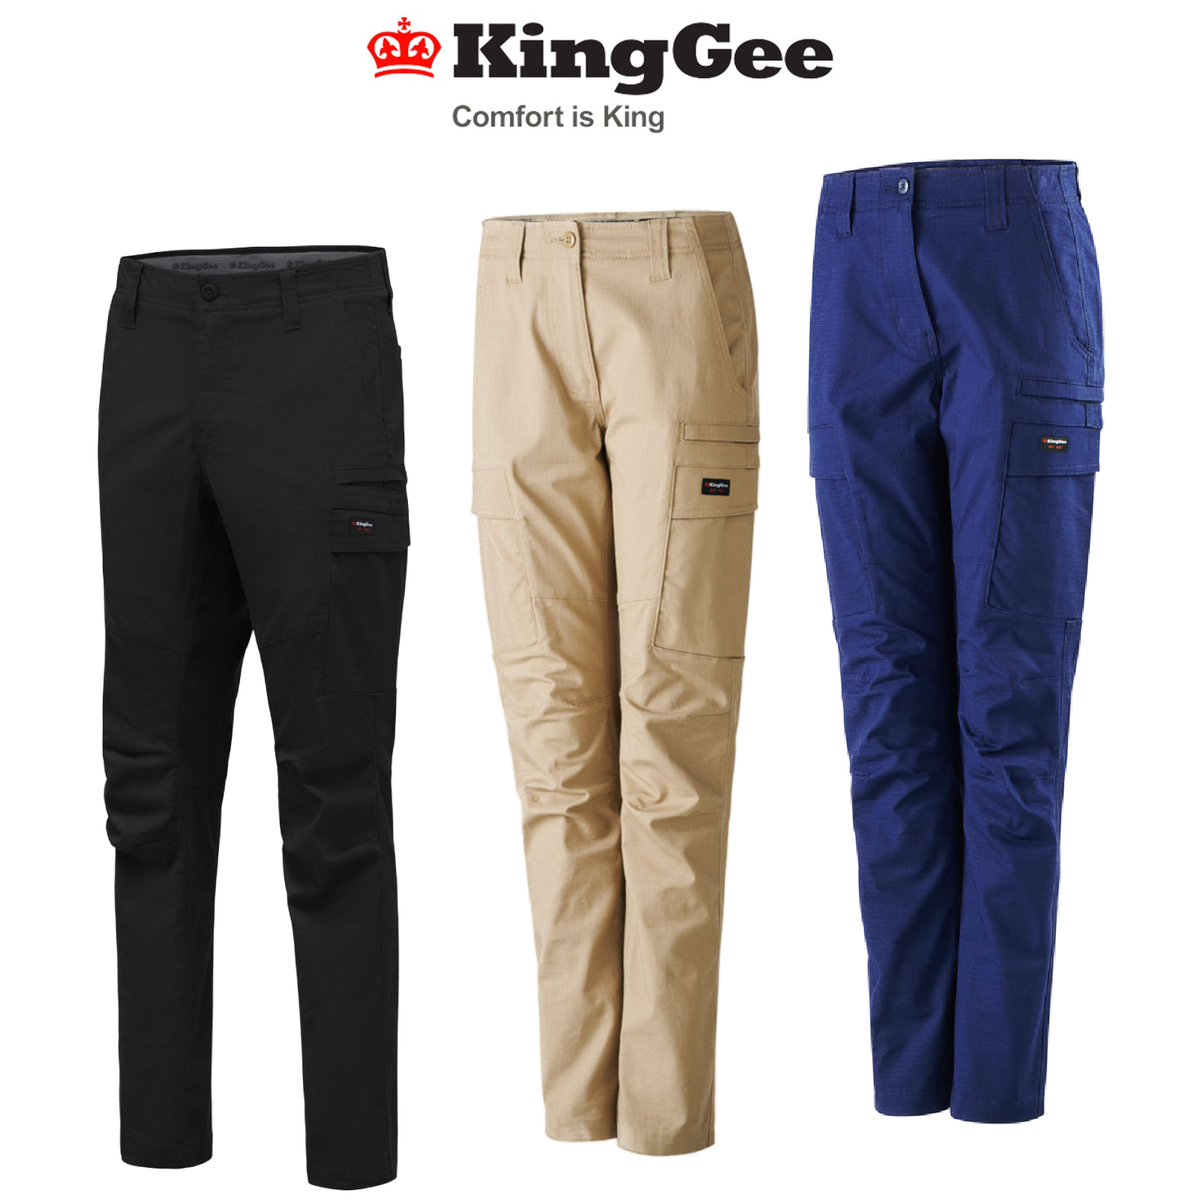 KIngGee Womens Workcool Pro Safety Stretch Cargo Pants Tough Comfy Work K43012